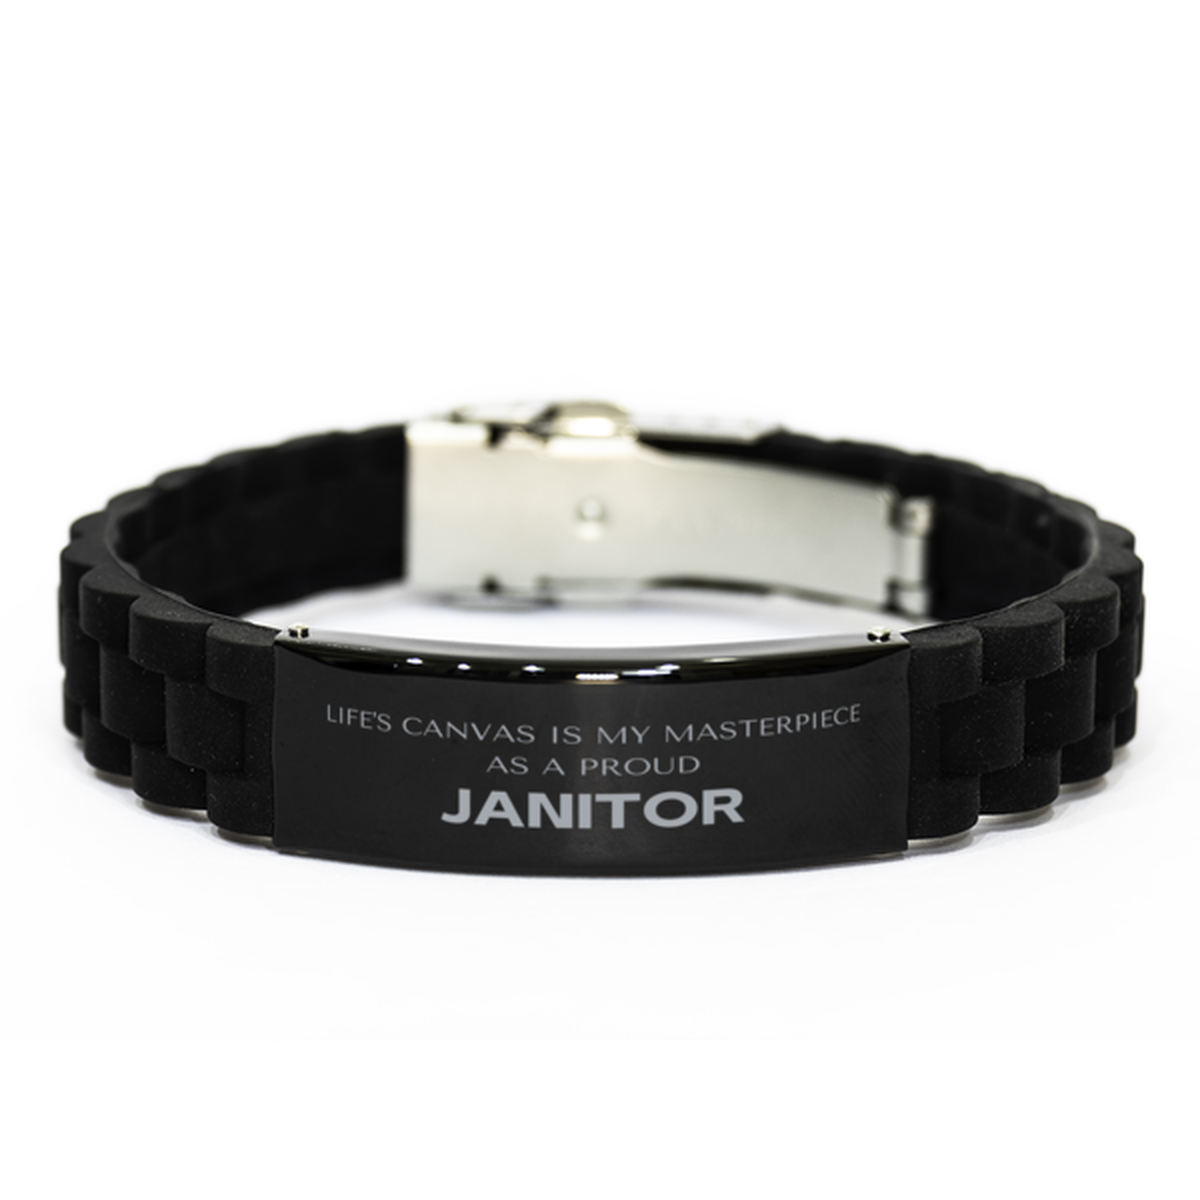 Proud Janitor Gifts, Life's canvas is my masterpiece, Epic Birthday Christmas Unique Black Glidelock Clasp Bracelet For Janitor, Coworkers, Men, Women, Friends